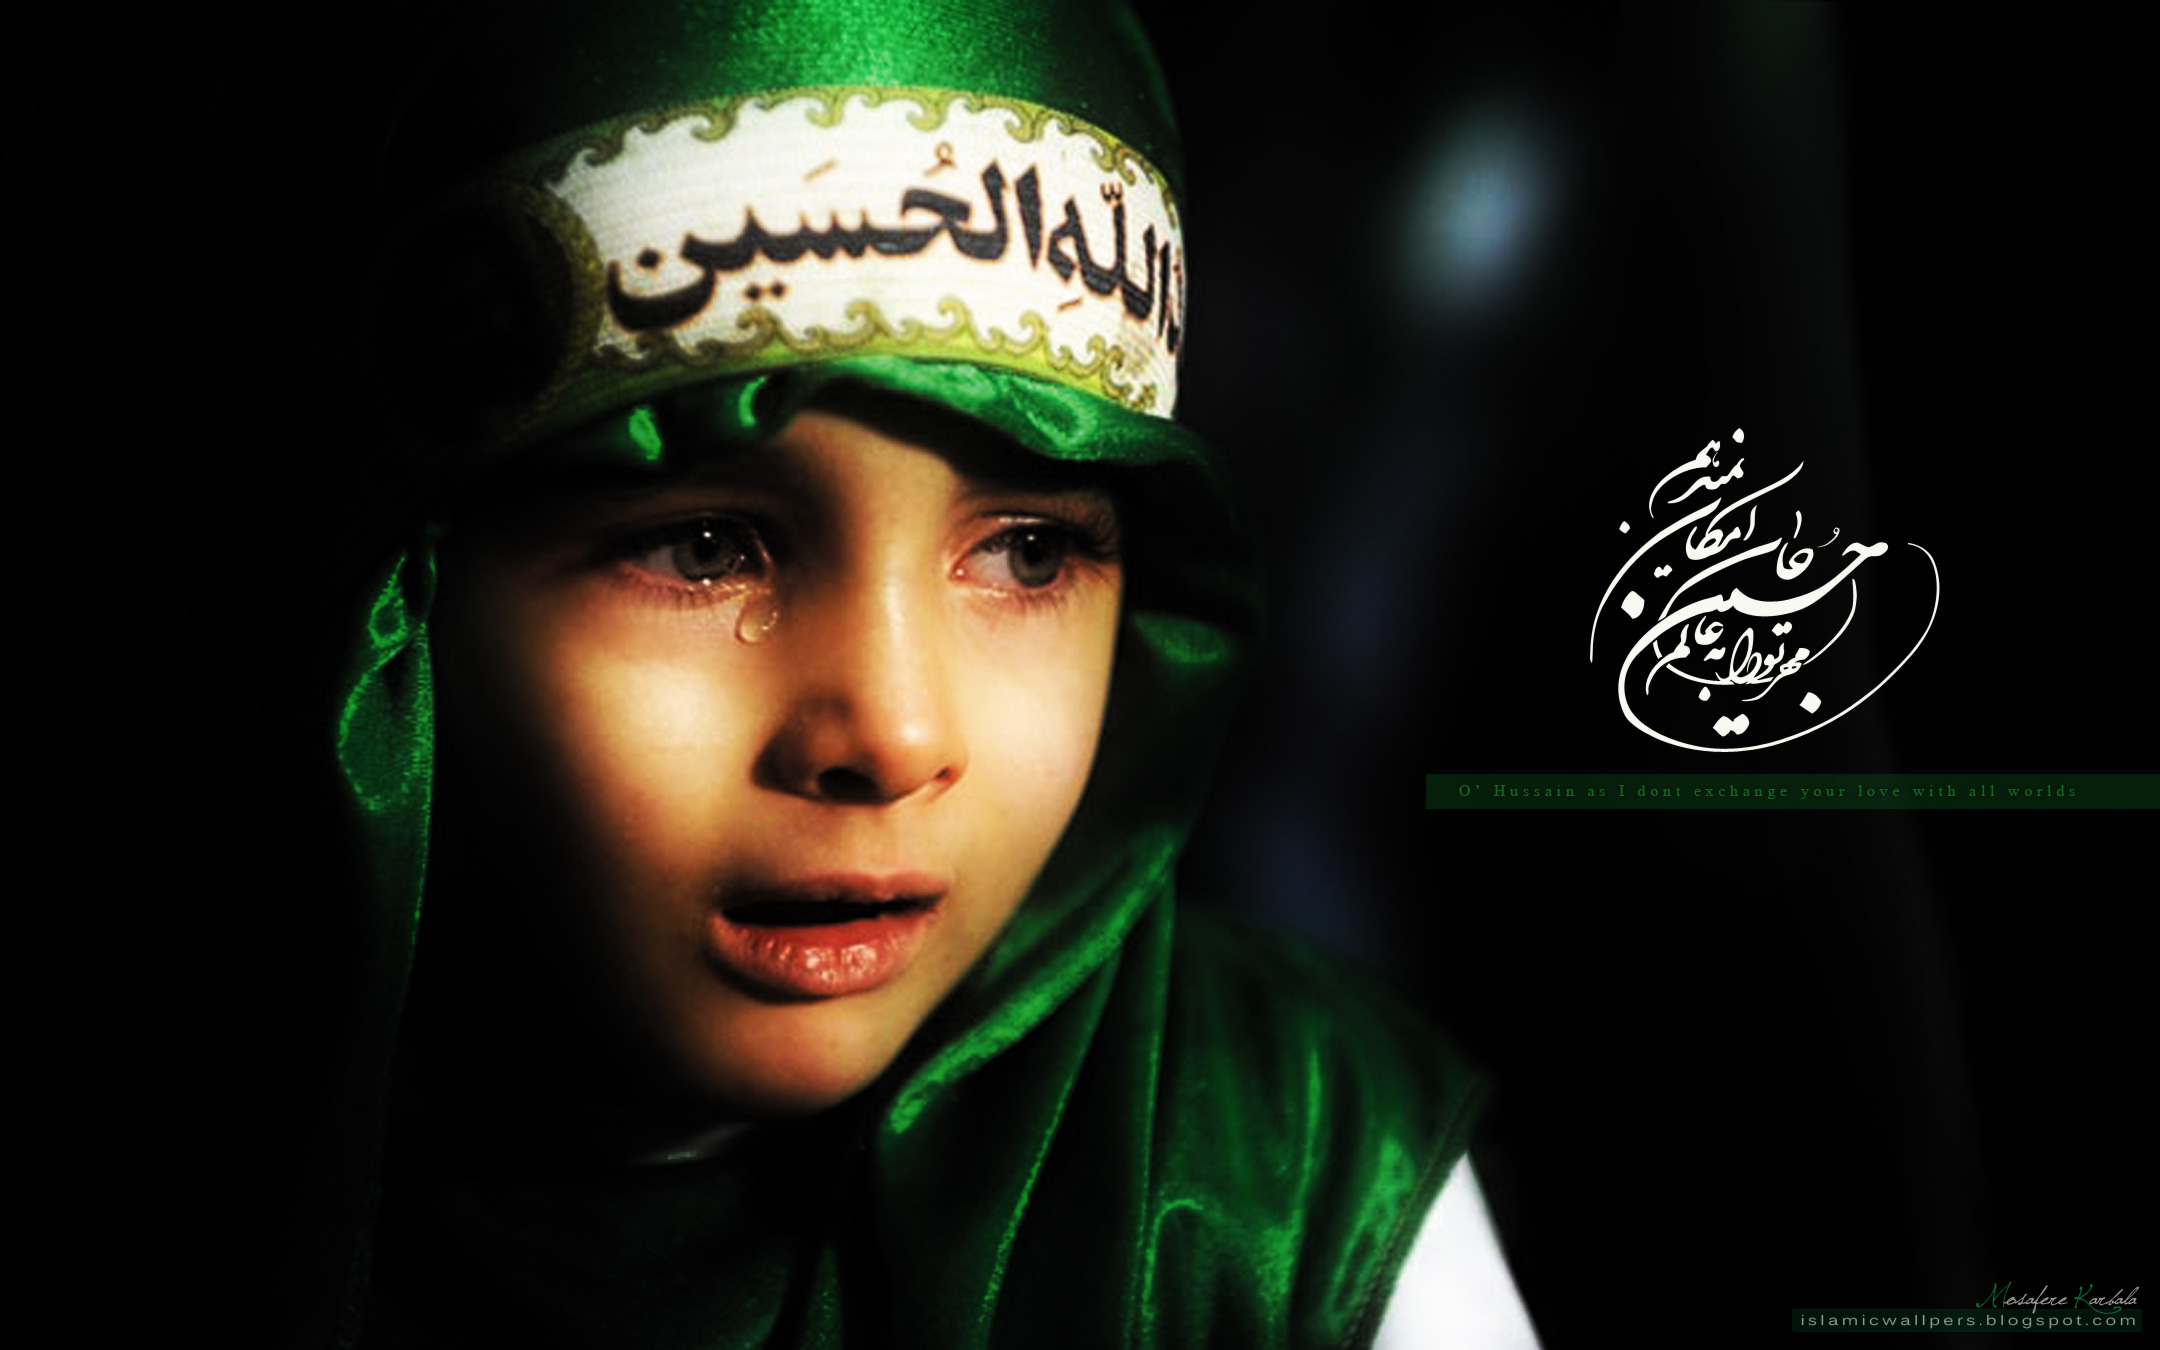 cry_for_imam_hussain_2_by_islamicwallpers.jpg